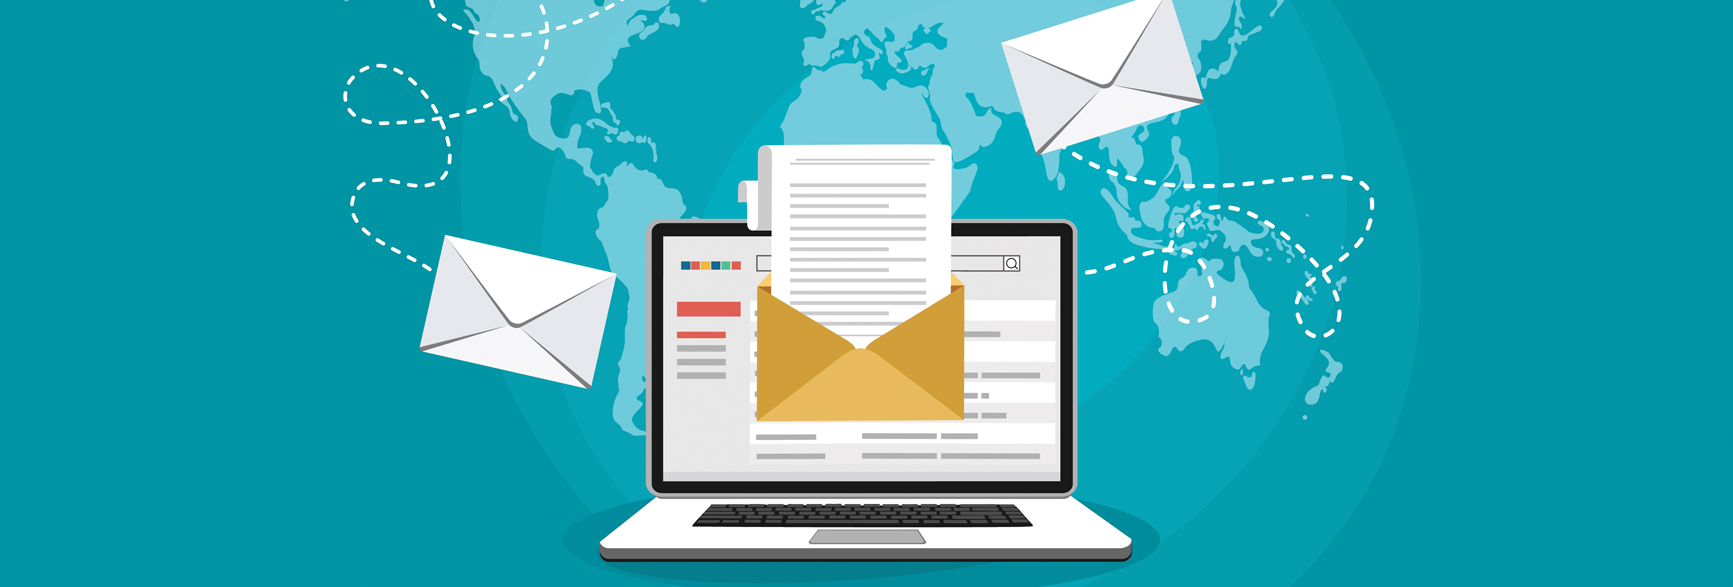 Top eight reasons to make the most of email marketing